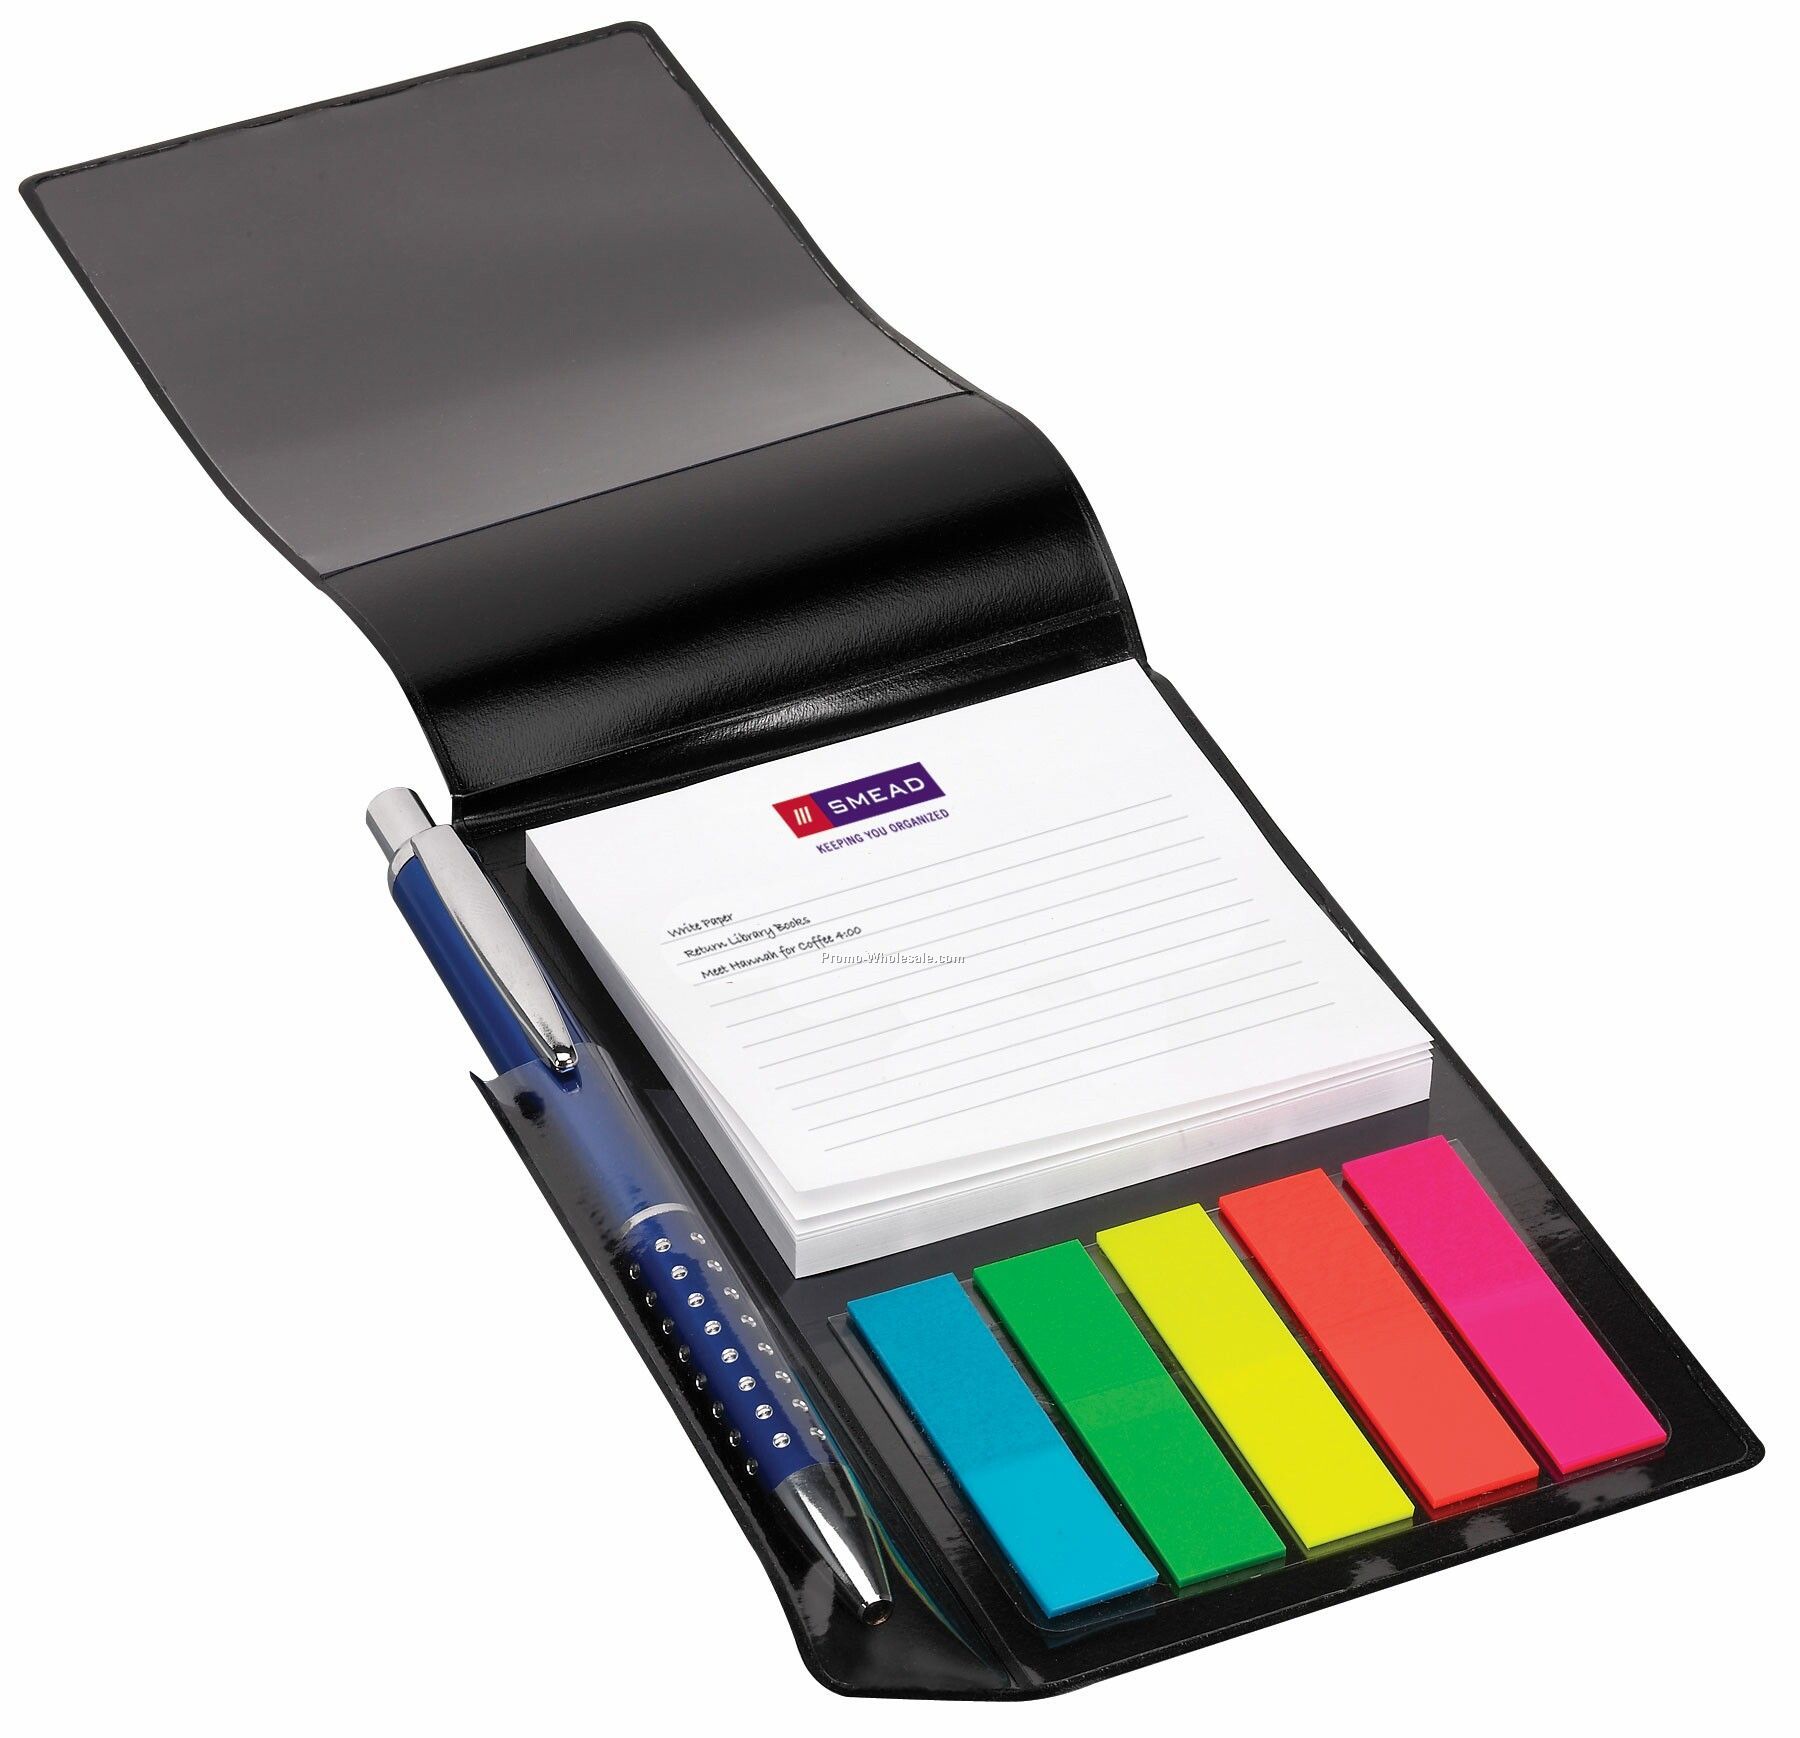 3"x3" Note Pad With 50 Sheet & 100 Flag